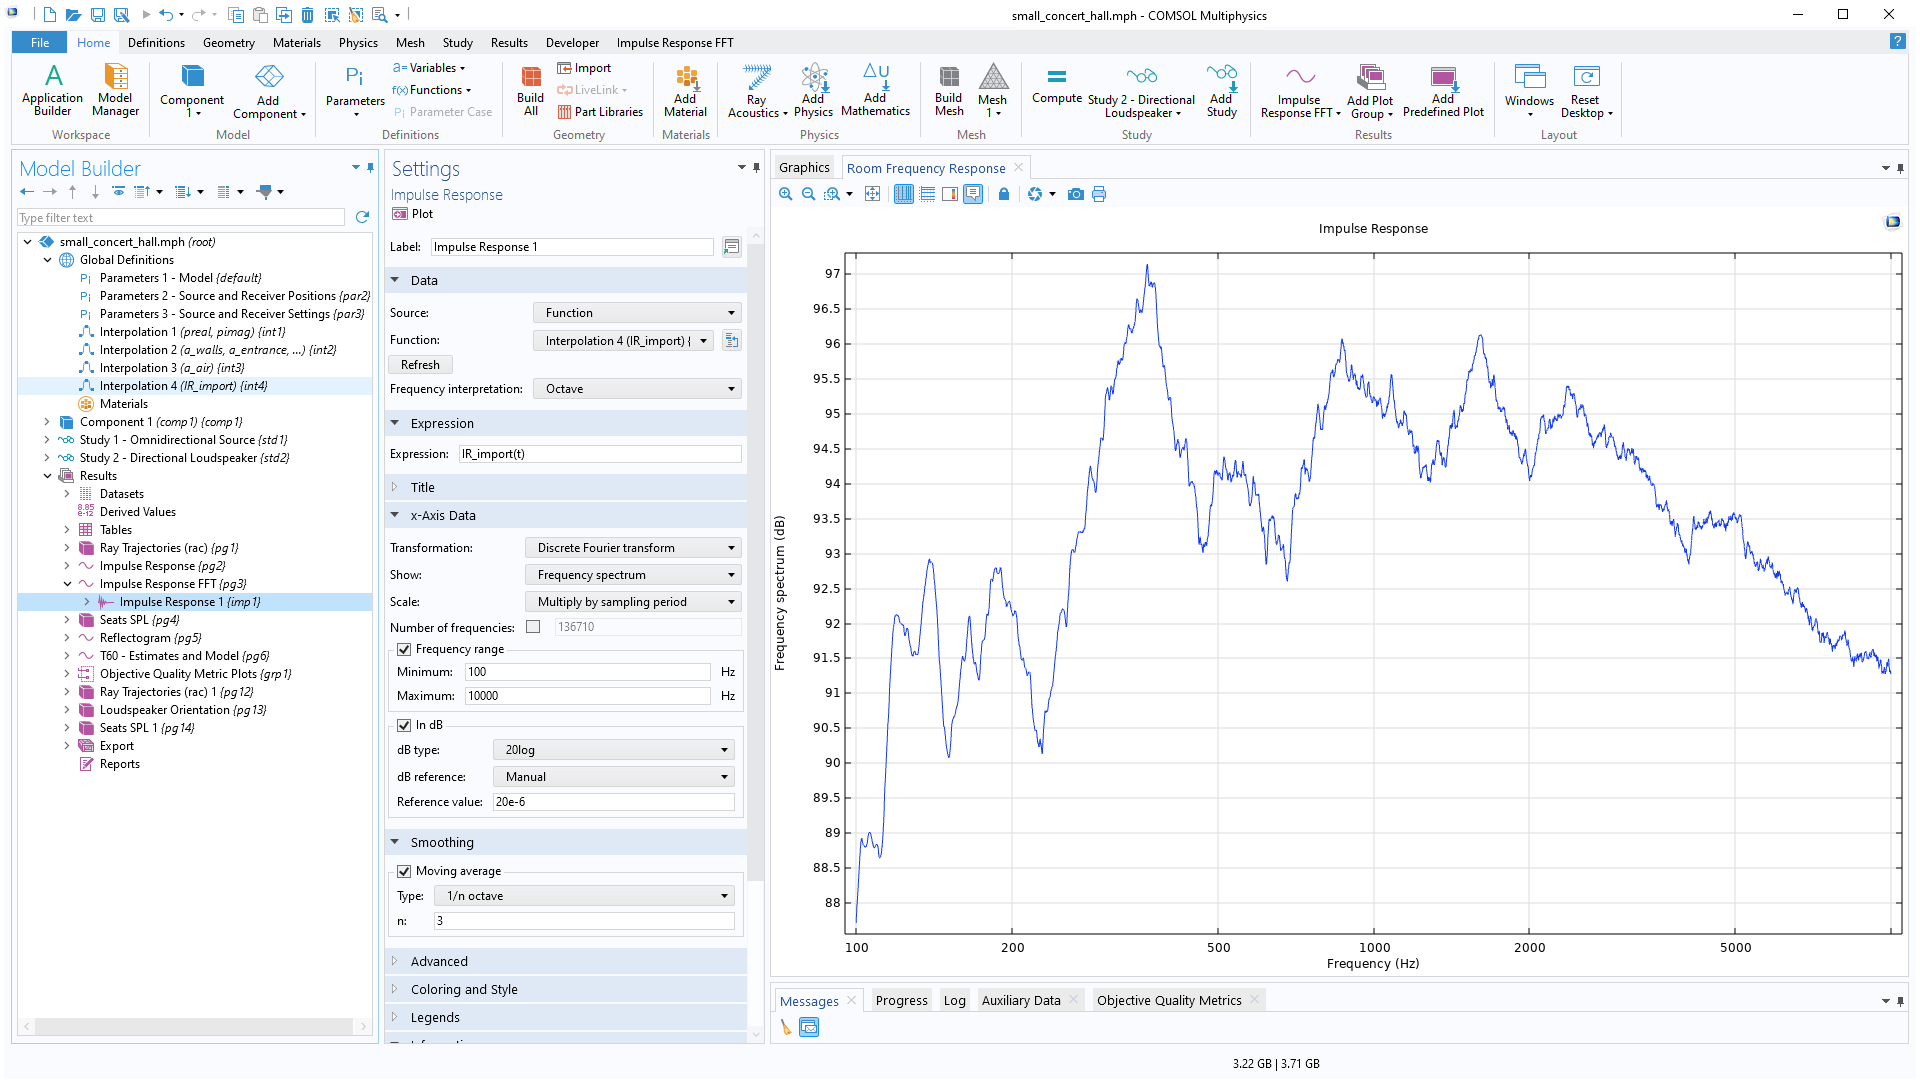 The COMSOL Multiphysics UI showing the Model Builder with the Impulse Response results node highlighted, the corresponding Settings window, and a 1D plot showing the frequency response in the Graphics window.